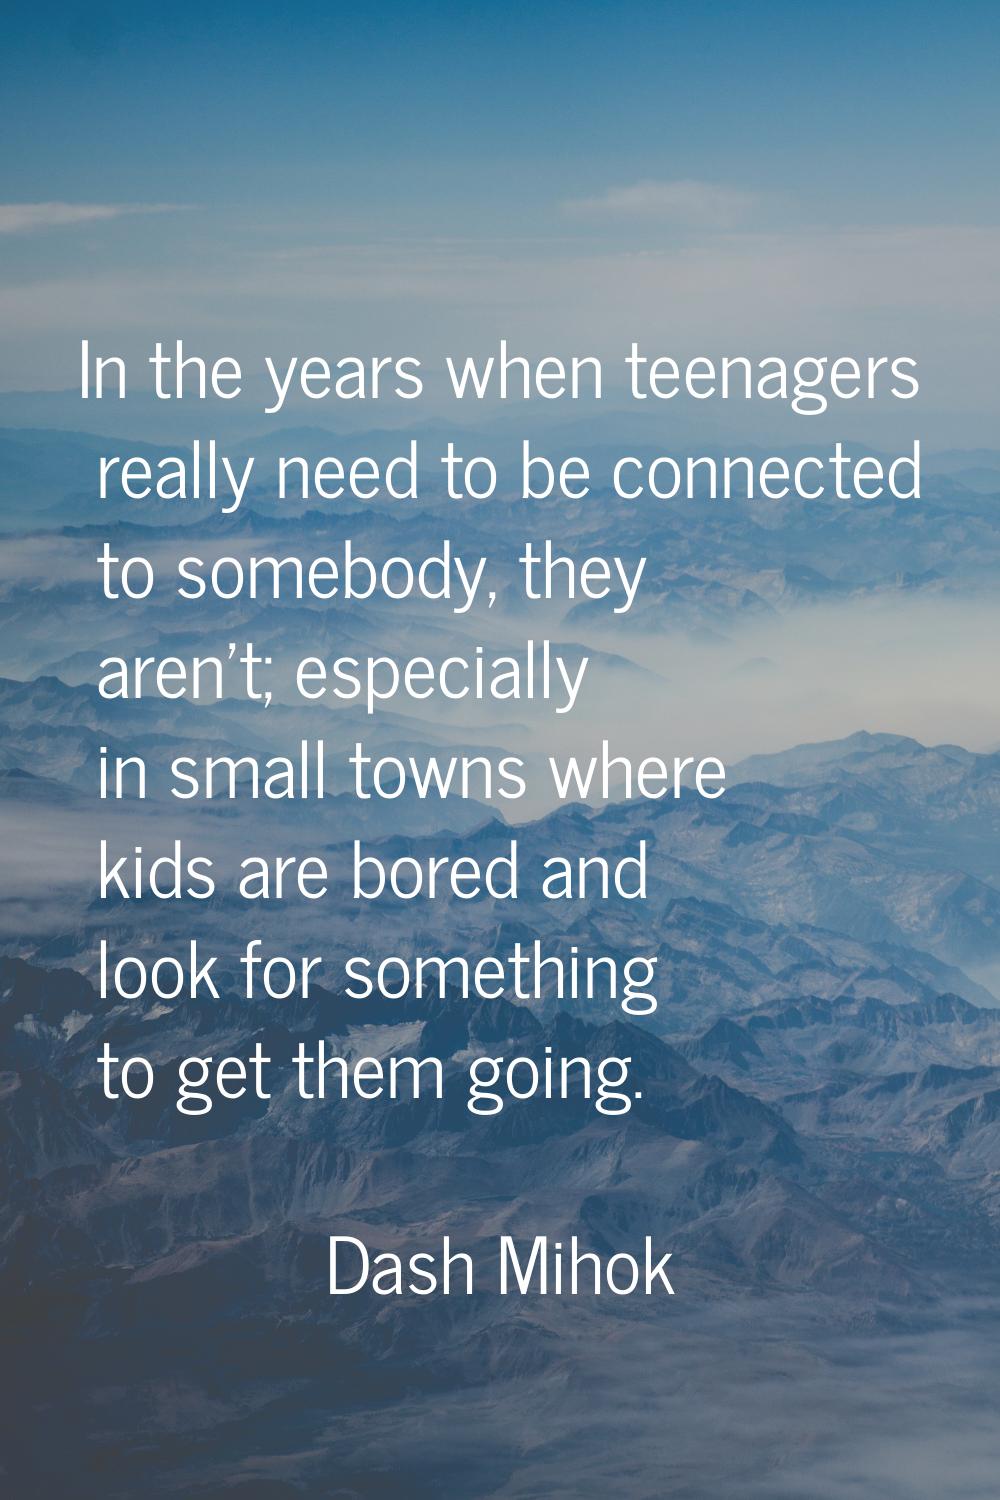 In the years when teenagers really need to be connected to somebody, they aren't; especially in sma